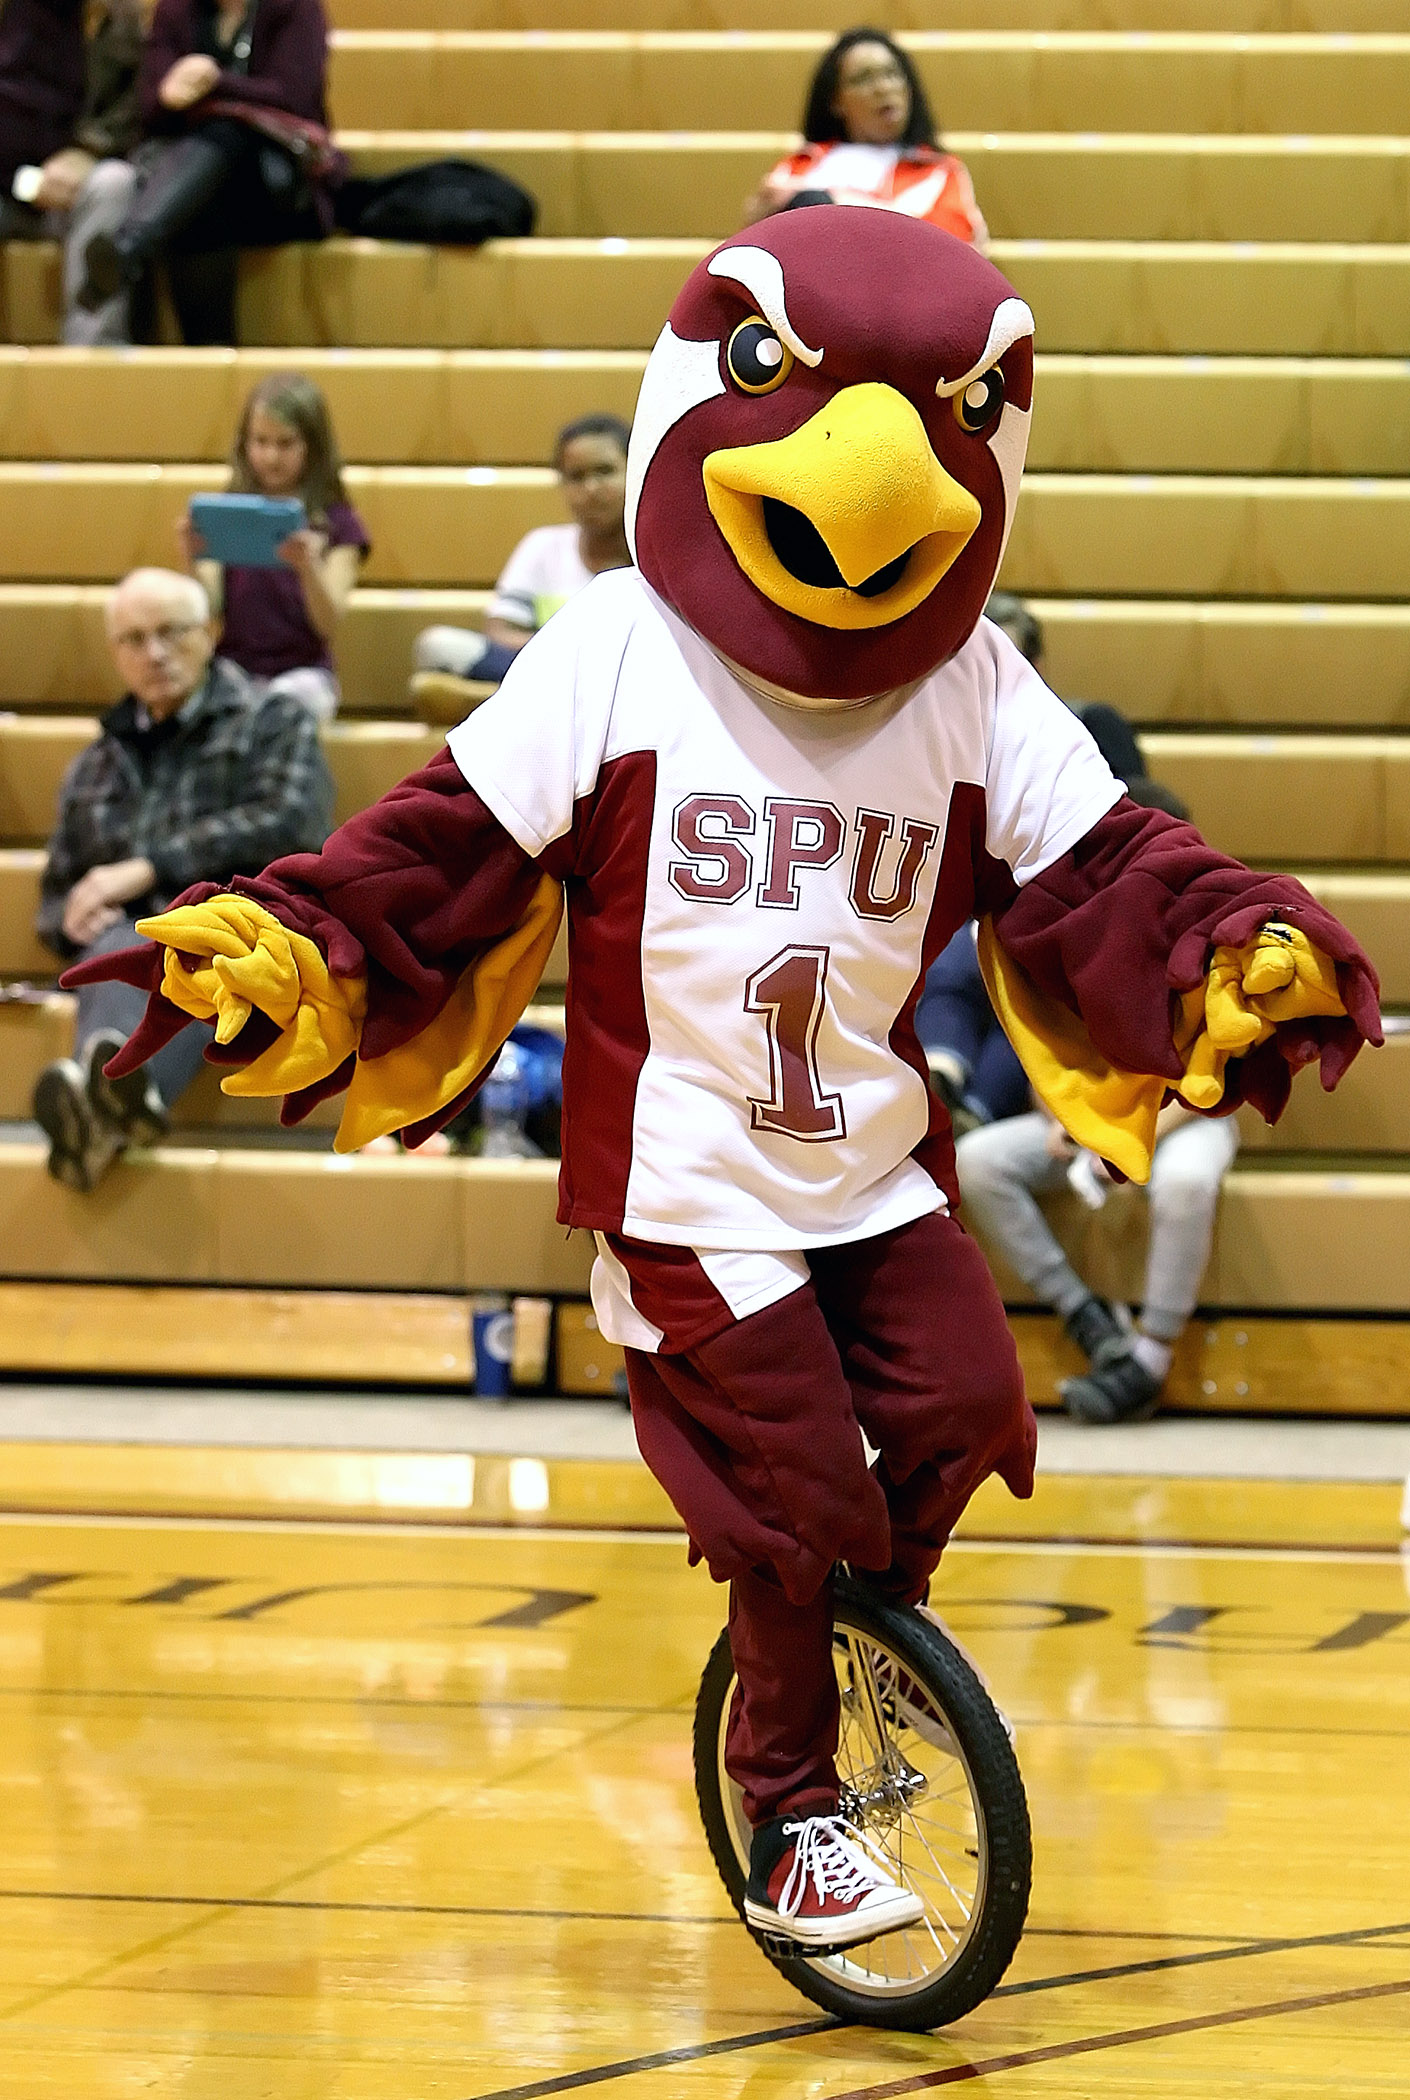 Seattle Pacific’s mascot, TALON, entertains the fans by riding a unicycle at halftime.  